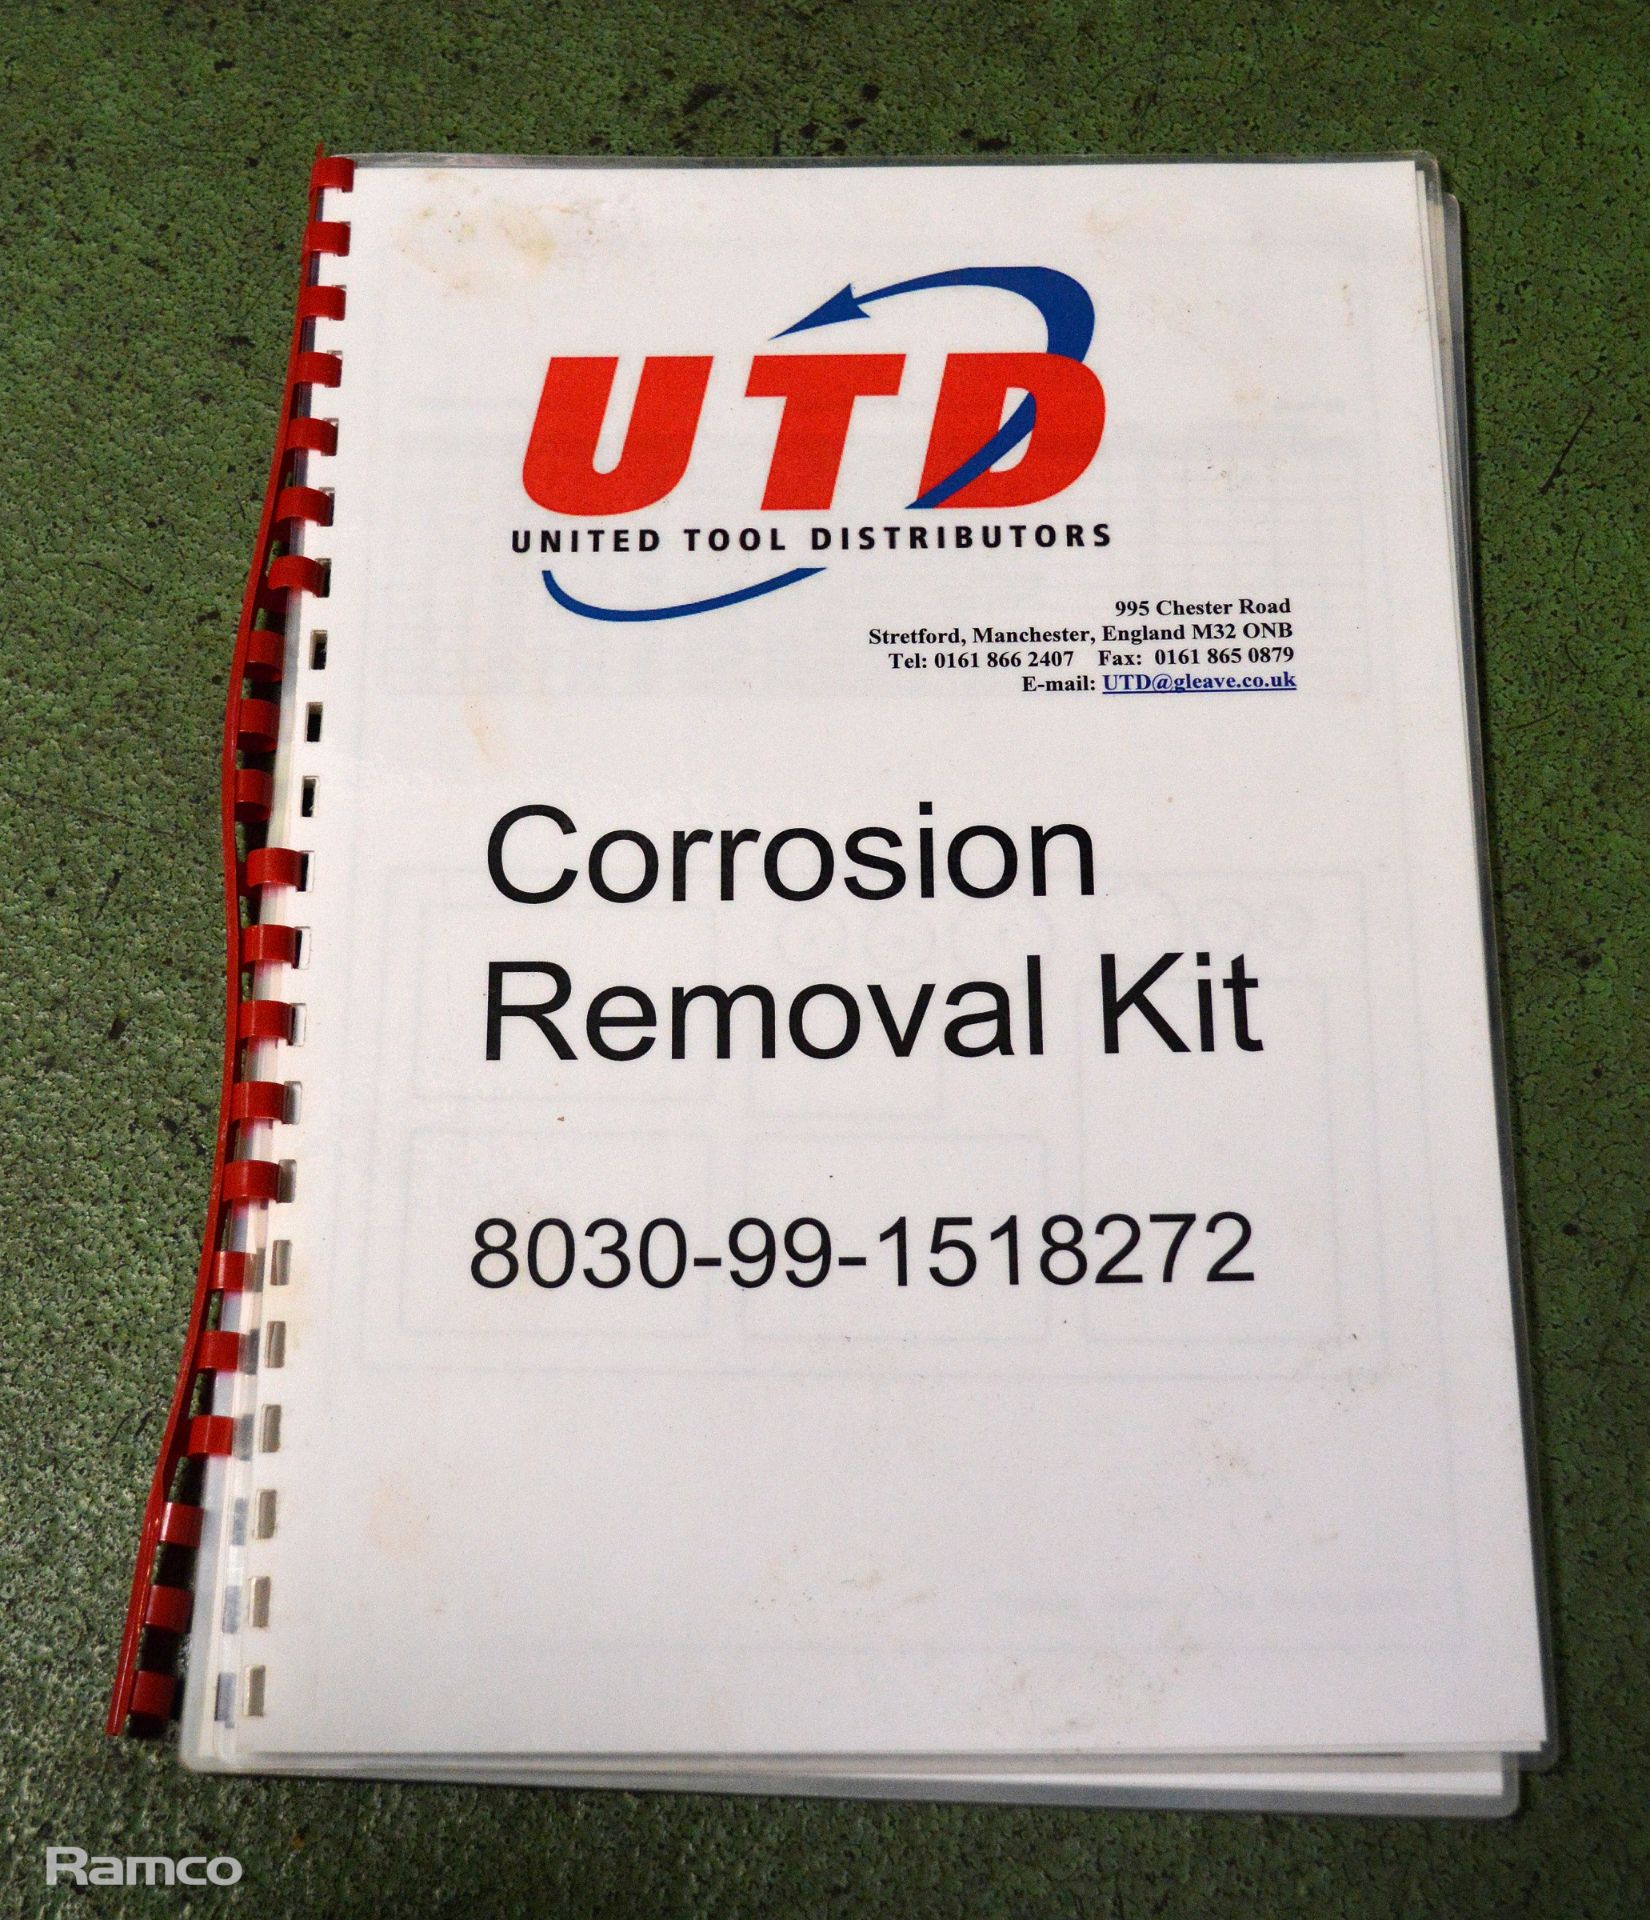 Corrosion removal kit in carry case - Image 5 of 9